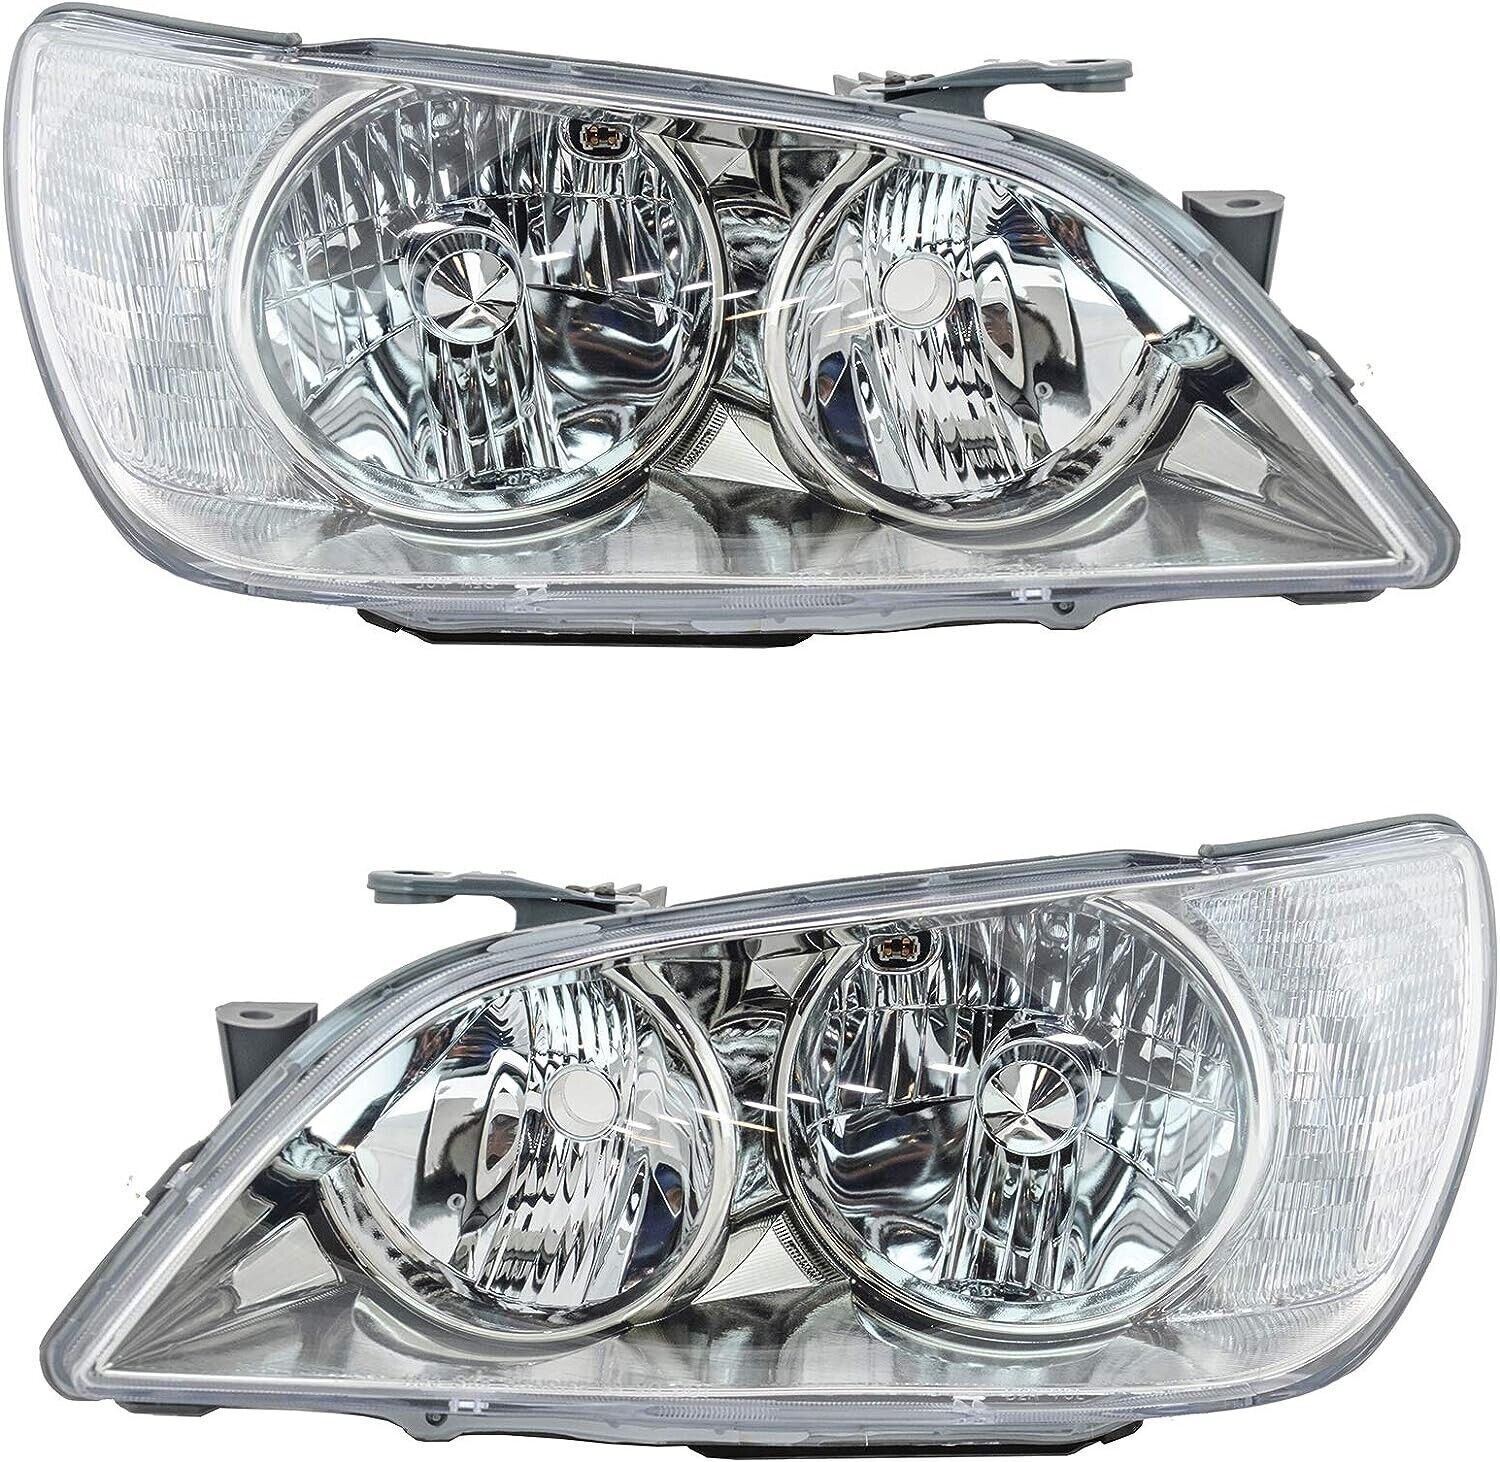 2001-2005 Factory Chrome OE Headlight Assembly Pair for Lexus IS300 Left+Right